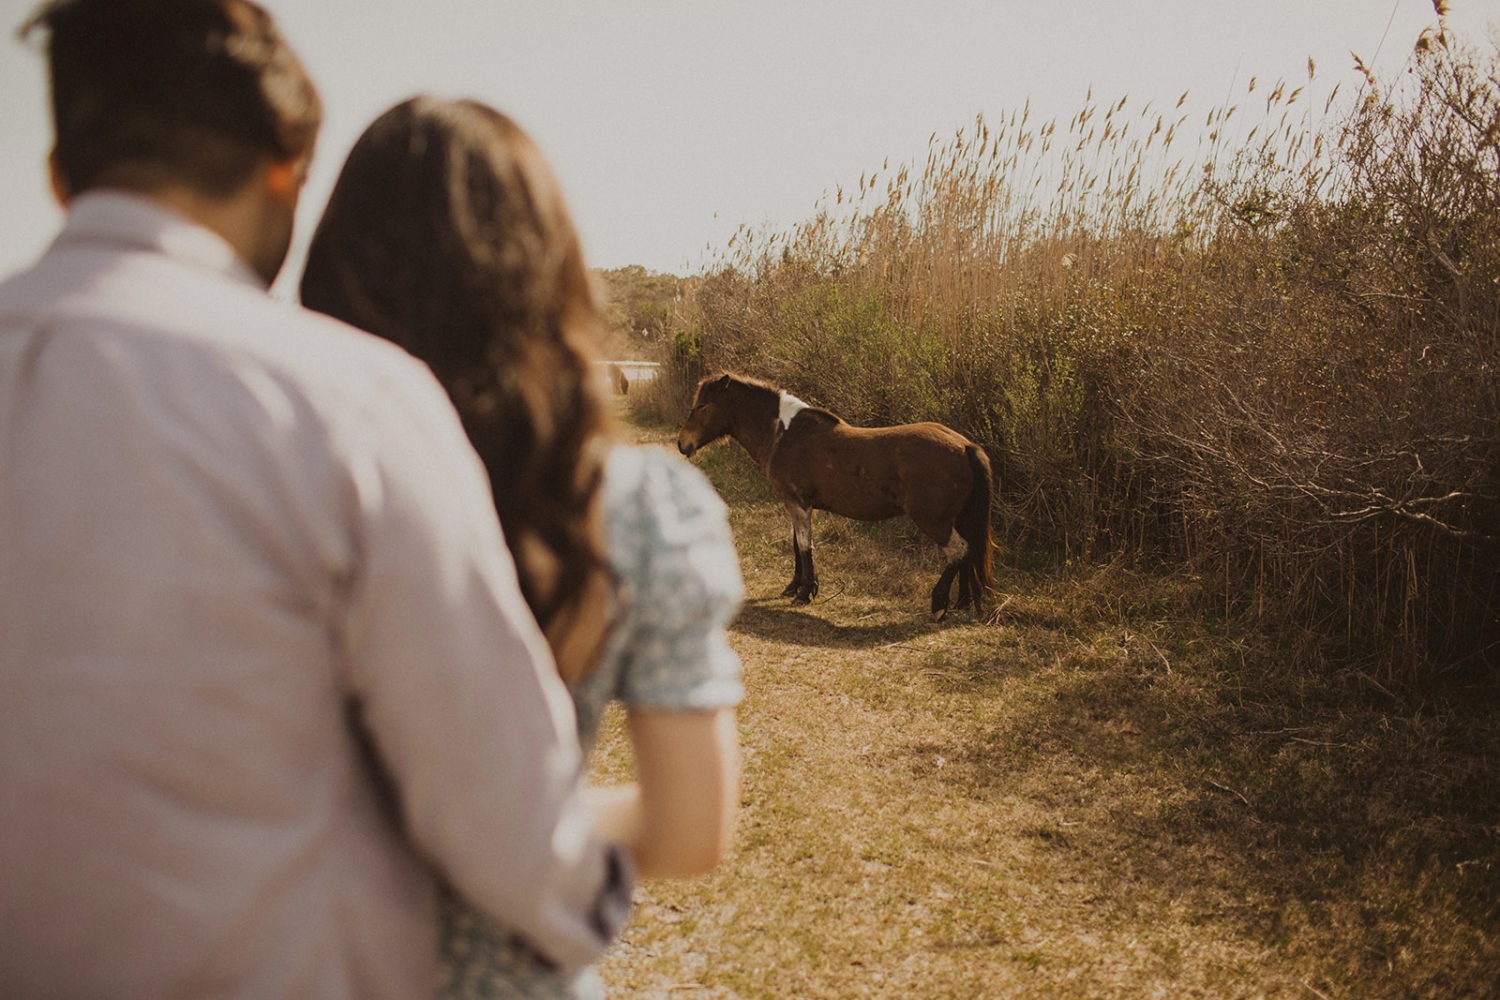 Couple embraces while looking at wild horse at Maryland engagement session 